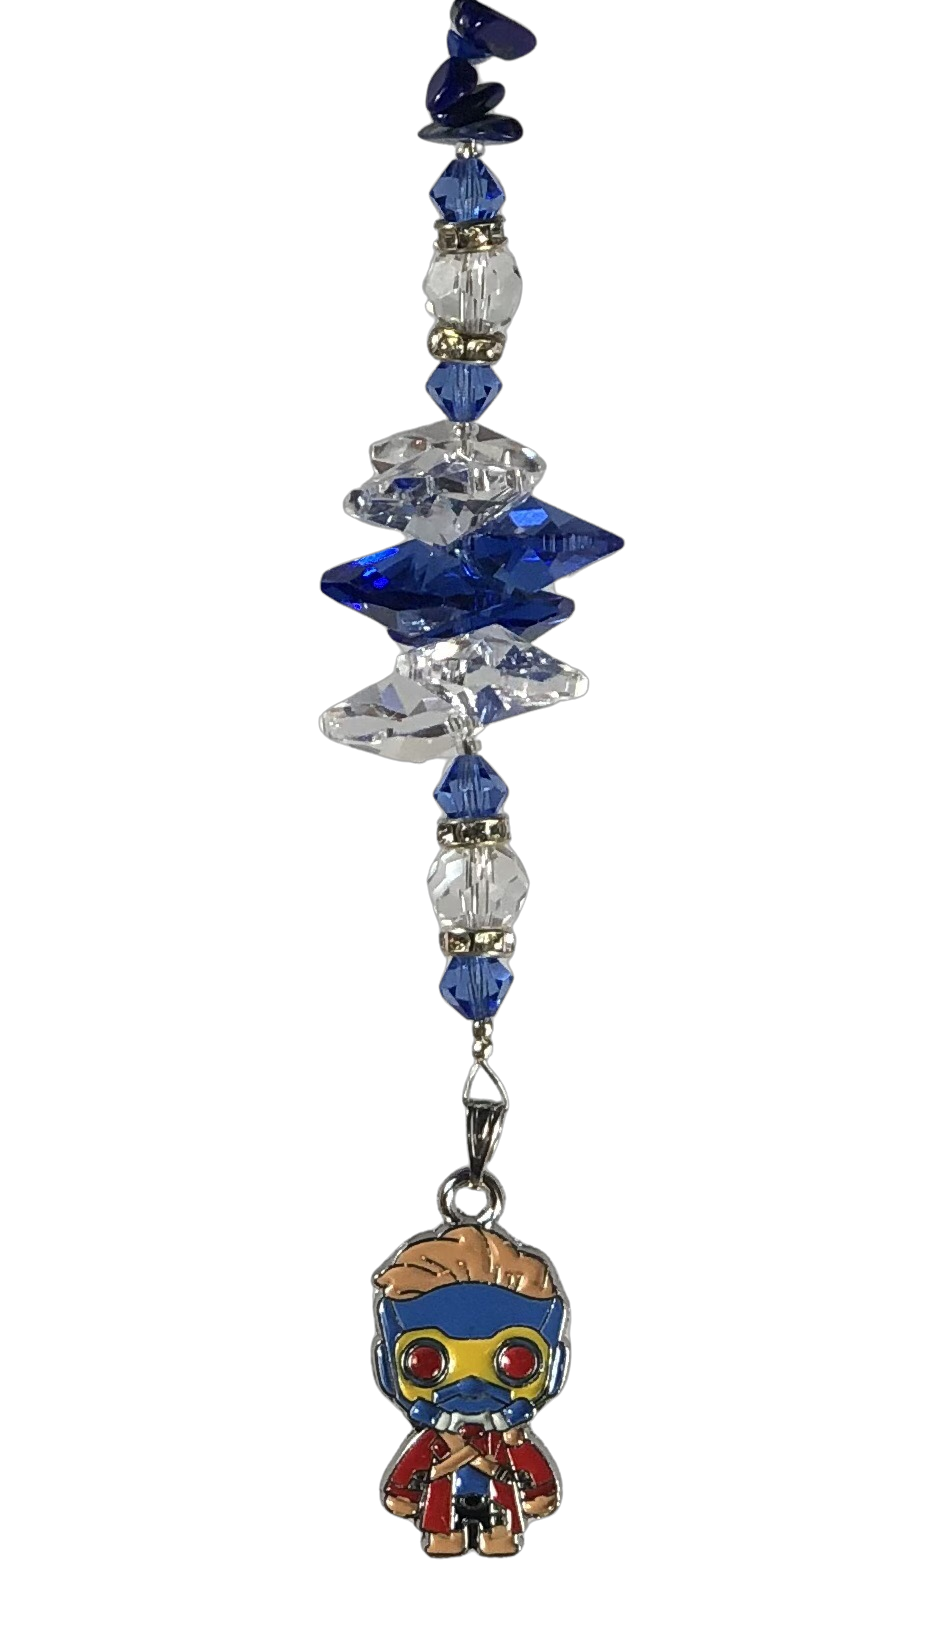 Star Lord - Guardians of the Galaxy  crystal suncatcher, decorated with lapis lazuli gemstone